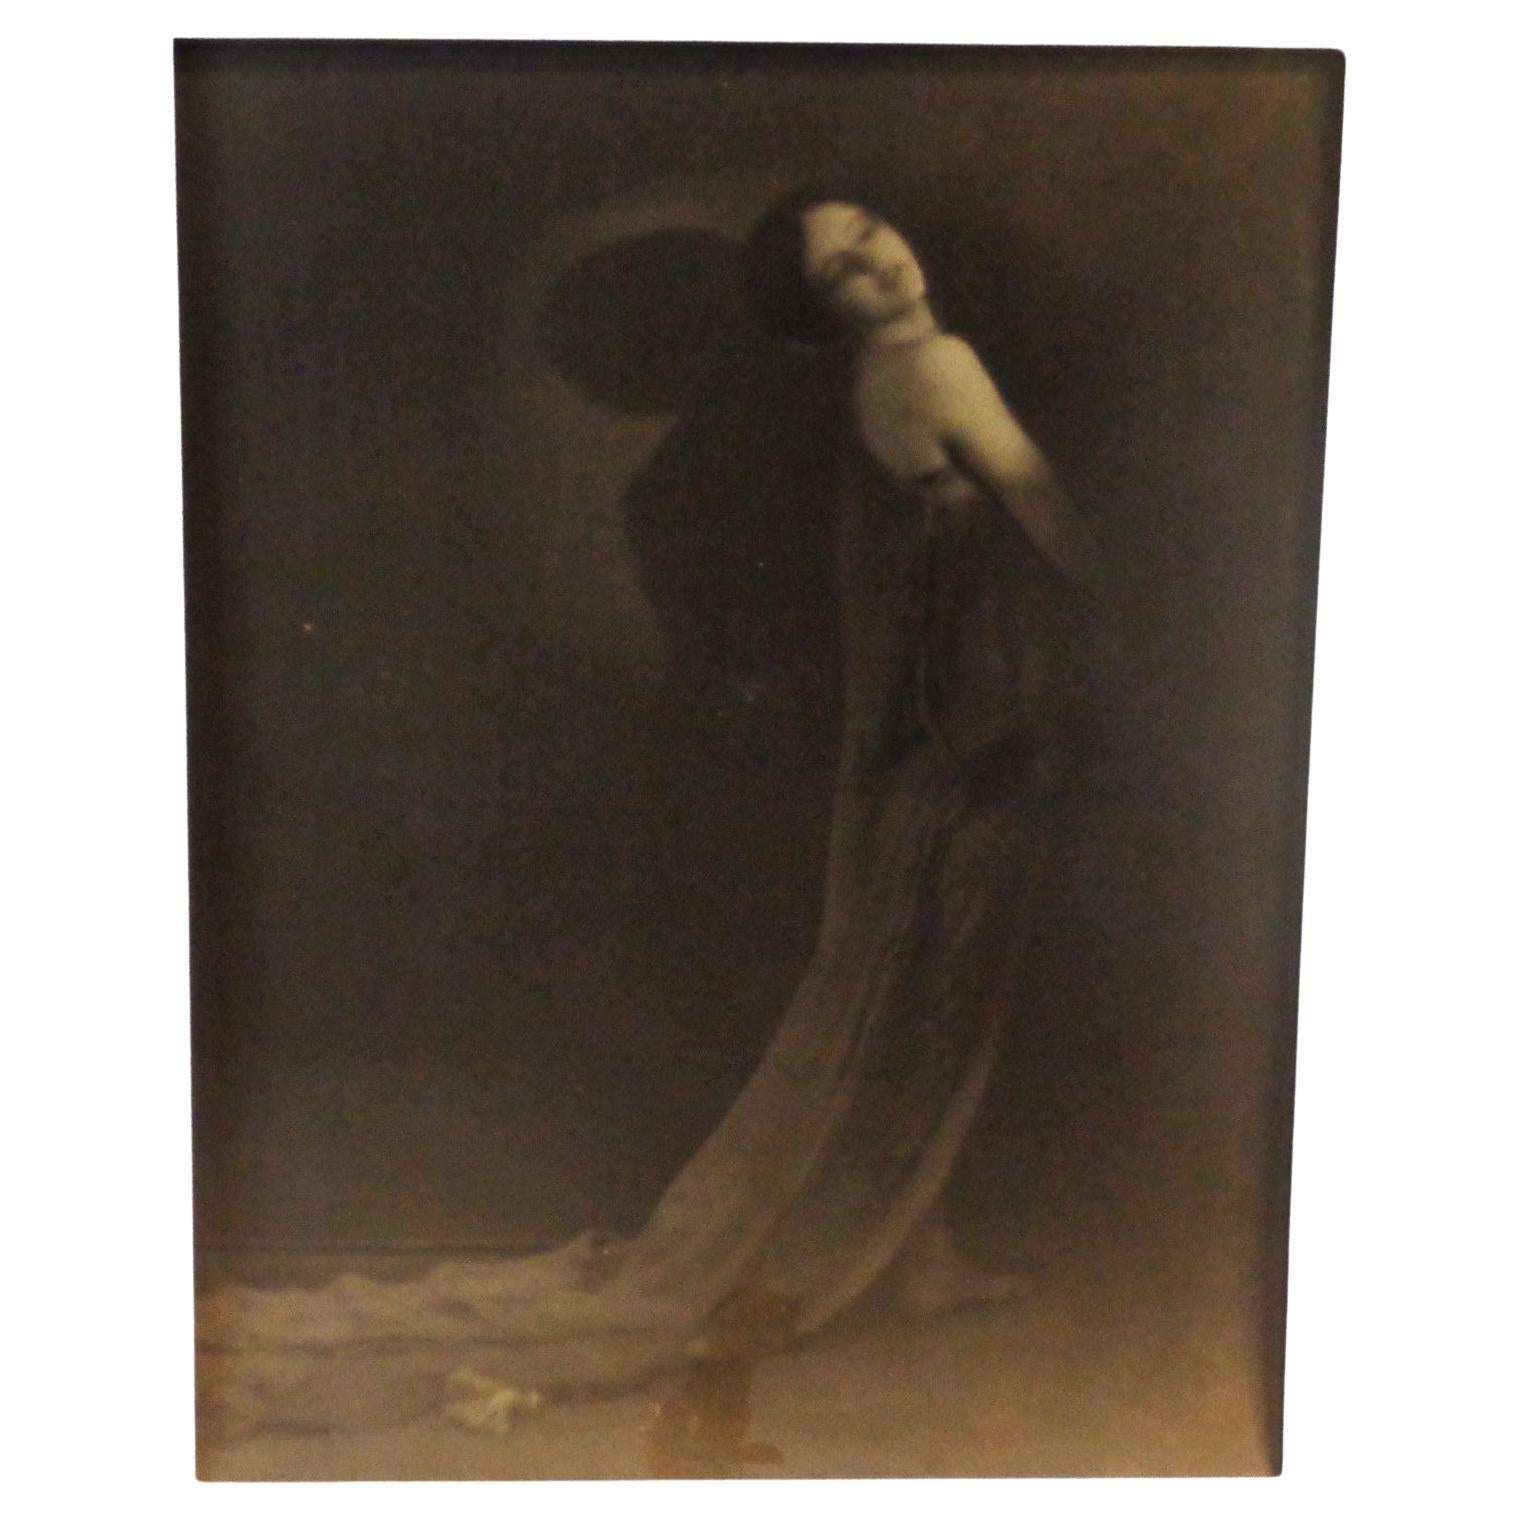 Early Pictorialist Sepia Tone Gelatin Silver Print Photograph Sultry Woman In Good Condition For Sale In Rochester, NY